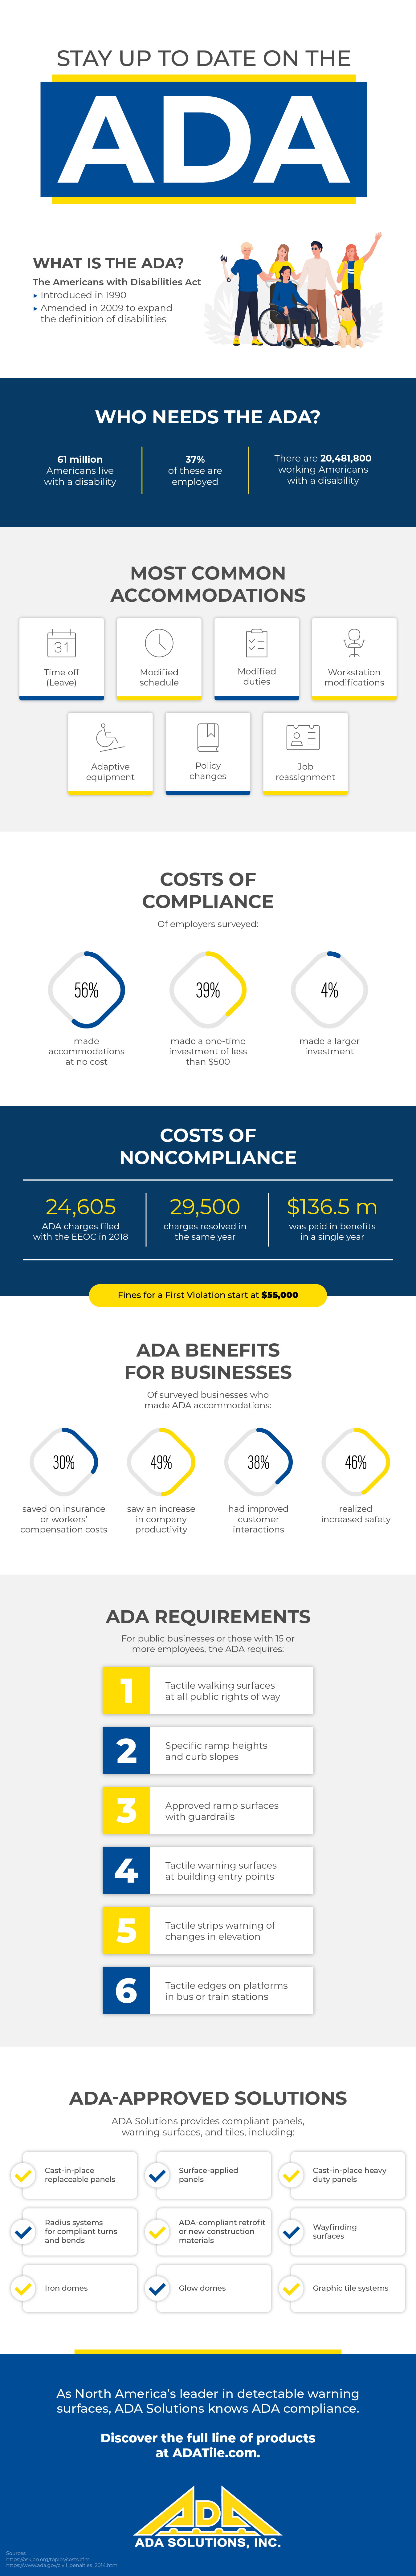 Stay Up to Date on the ADA Infographic